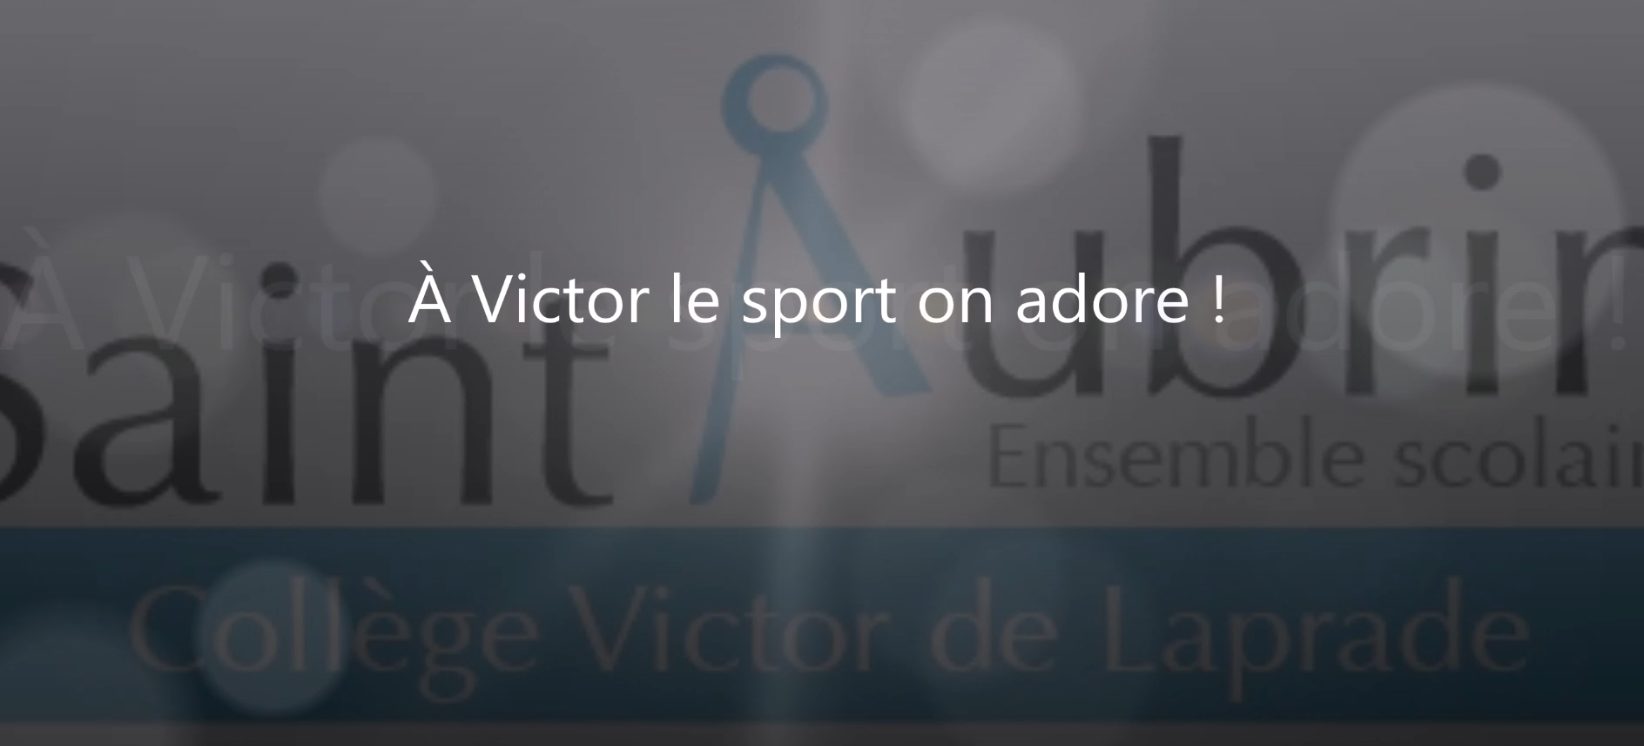 a victor le sport on adore.jpg